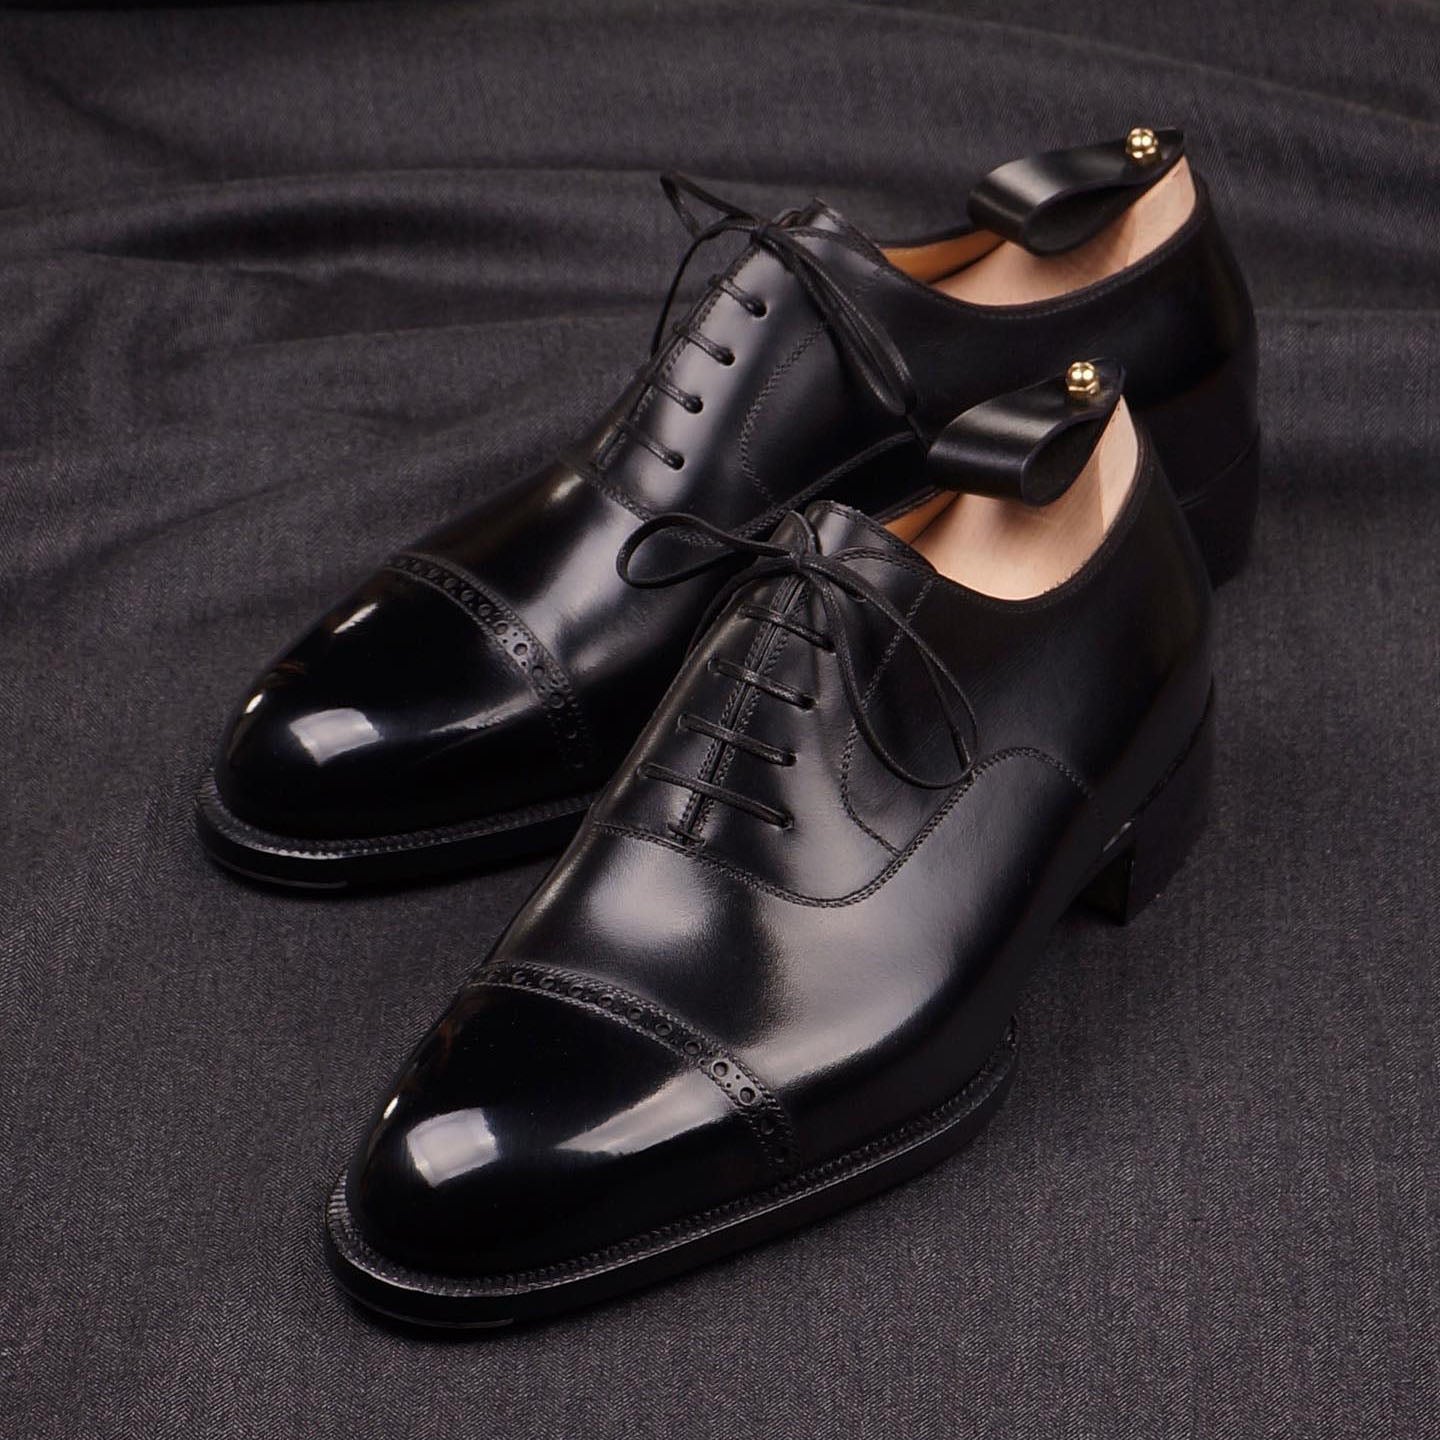 Classic leather formal oxford shoes